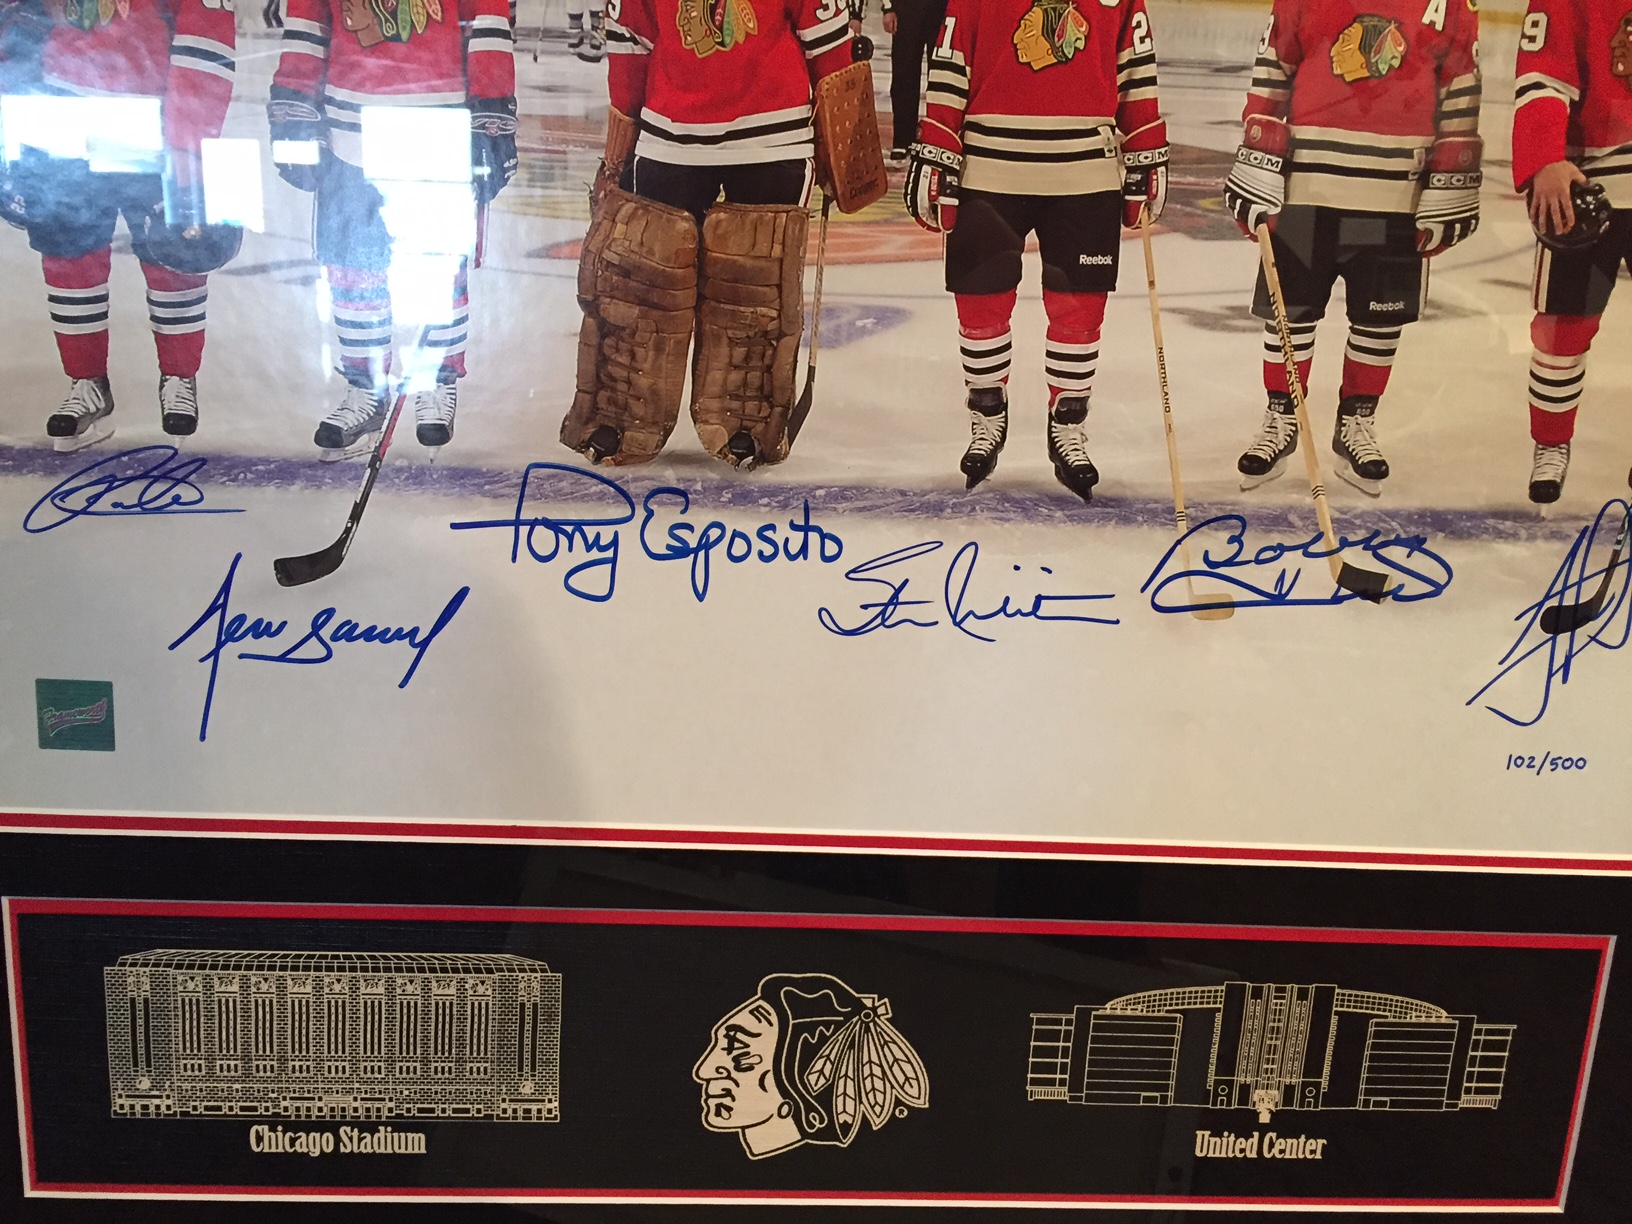 Stan Mikita Autographed Chicago Blackhawks 16X20 Photo - NHL Auctions